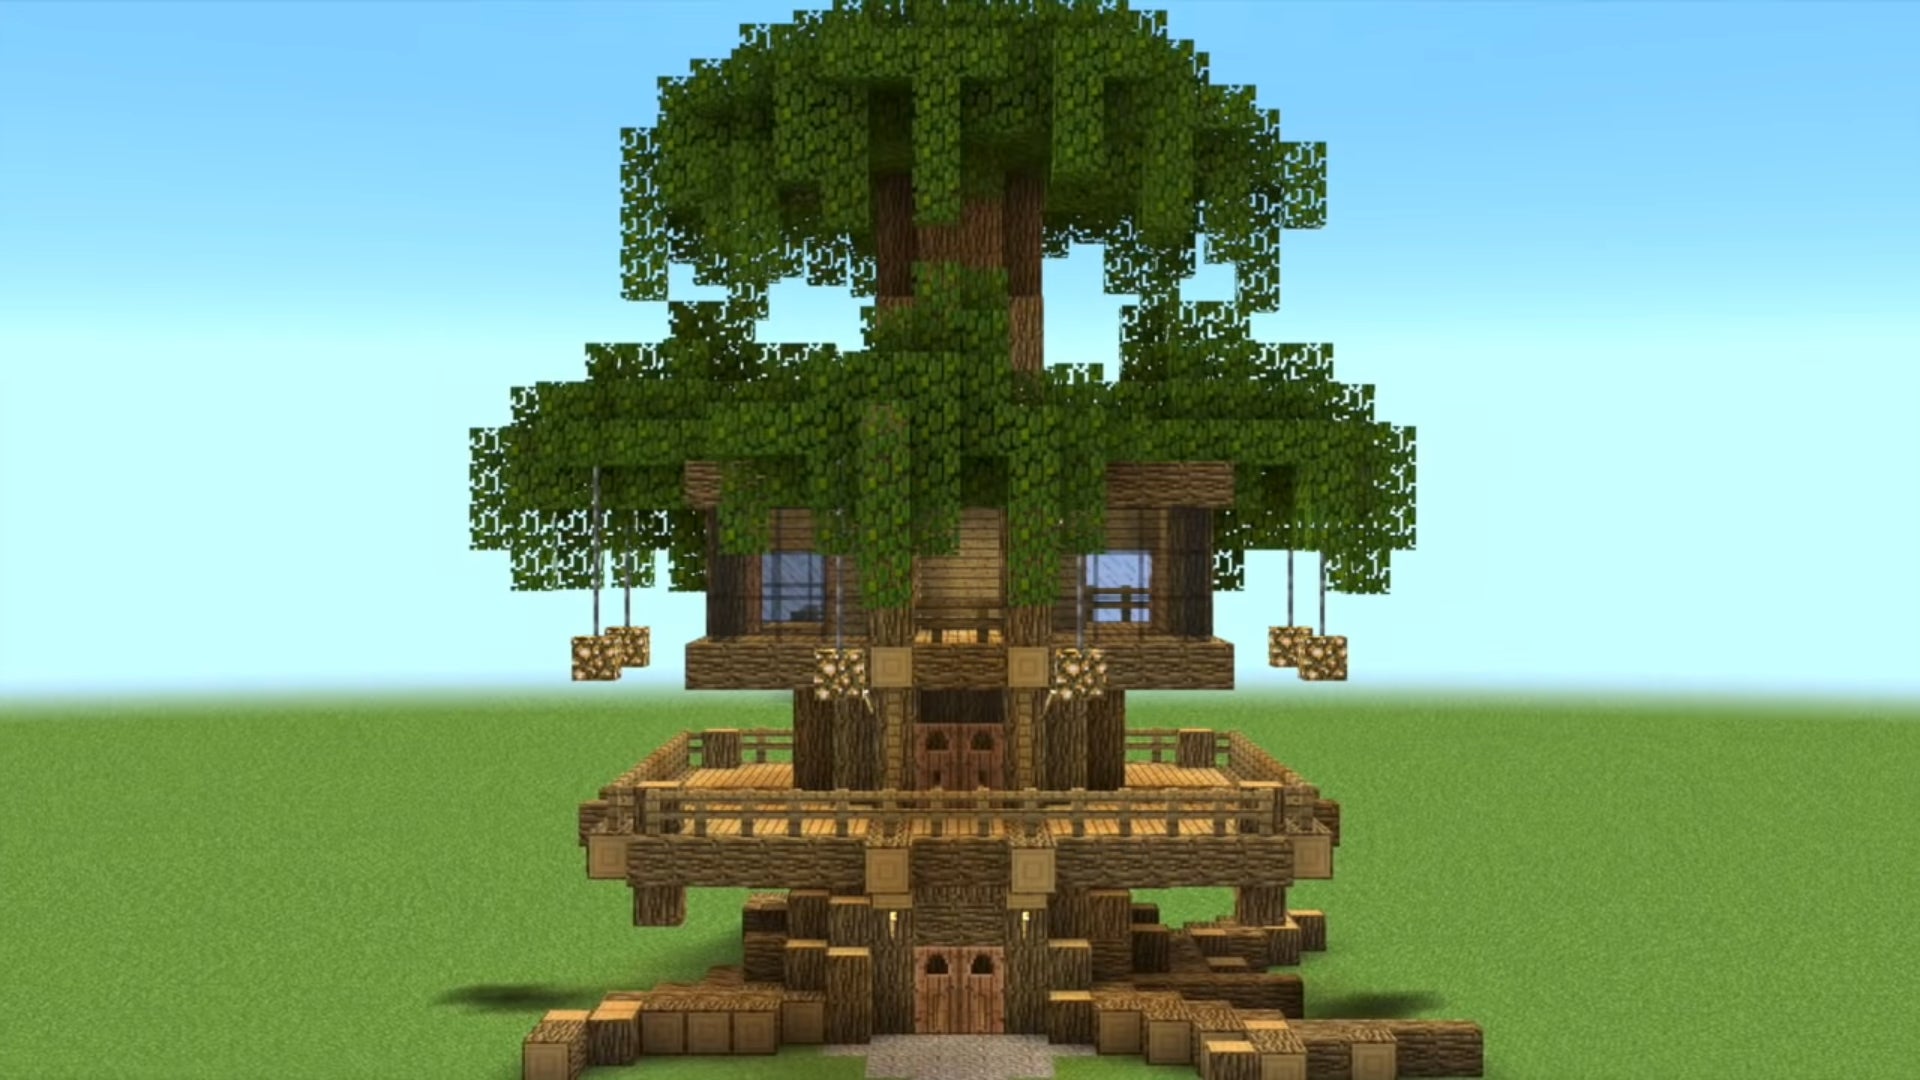 A large treehouse in Minecraft, built by YouTuber Shock Frost.